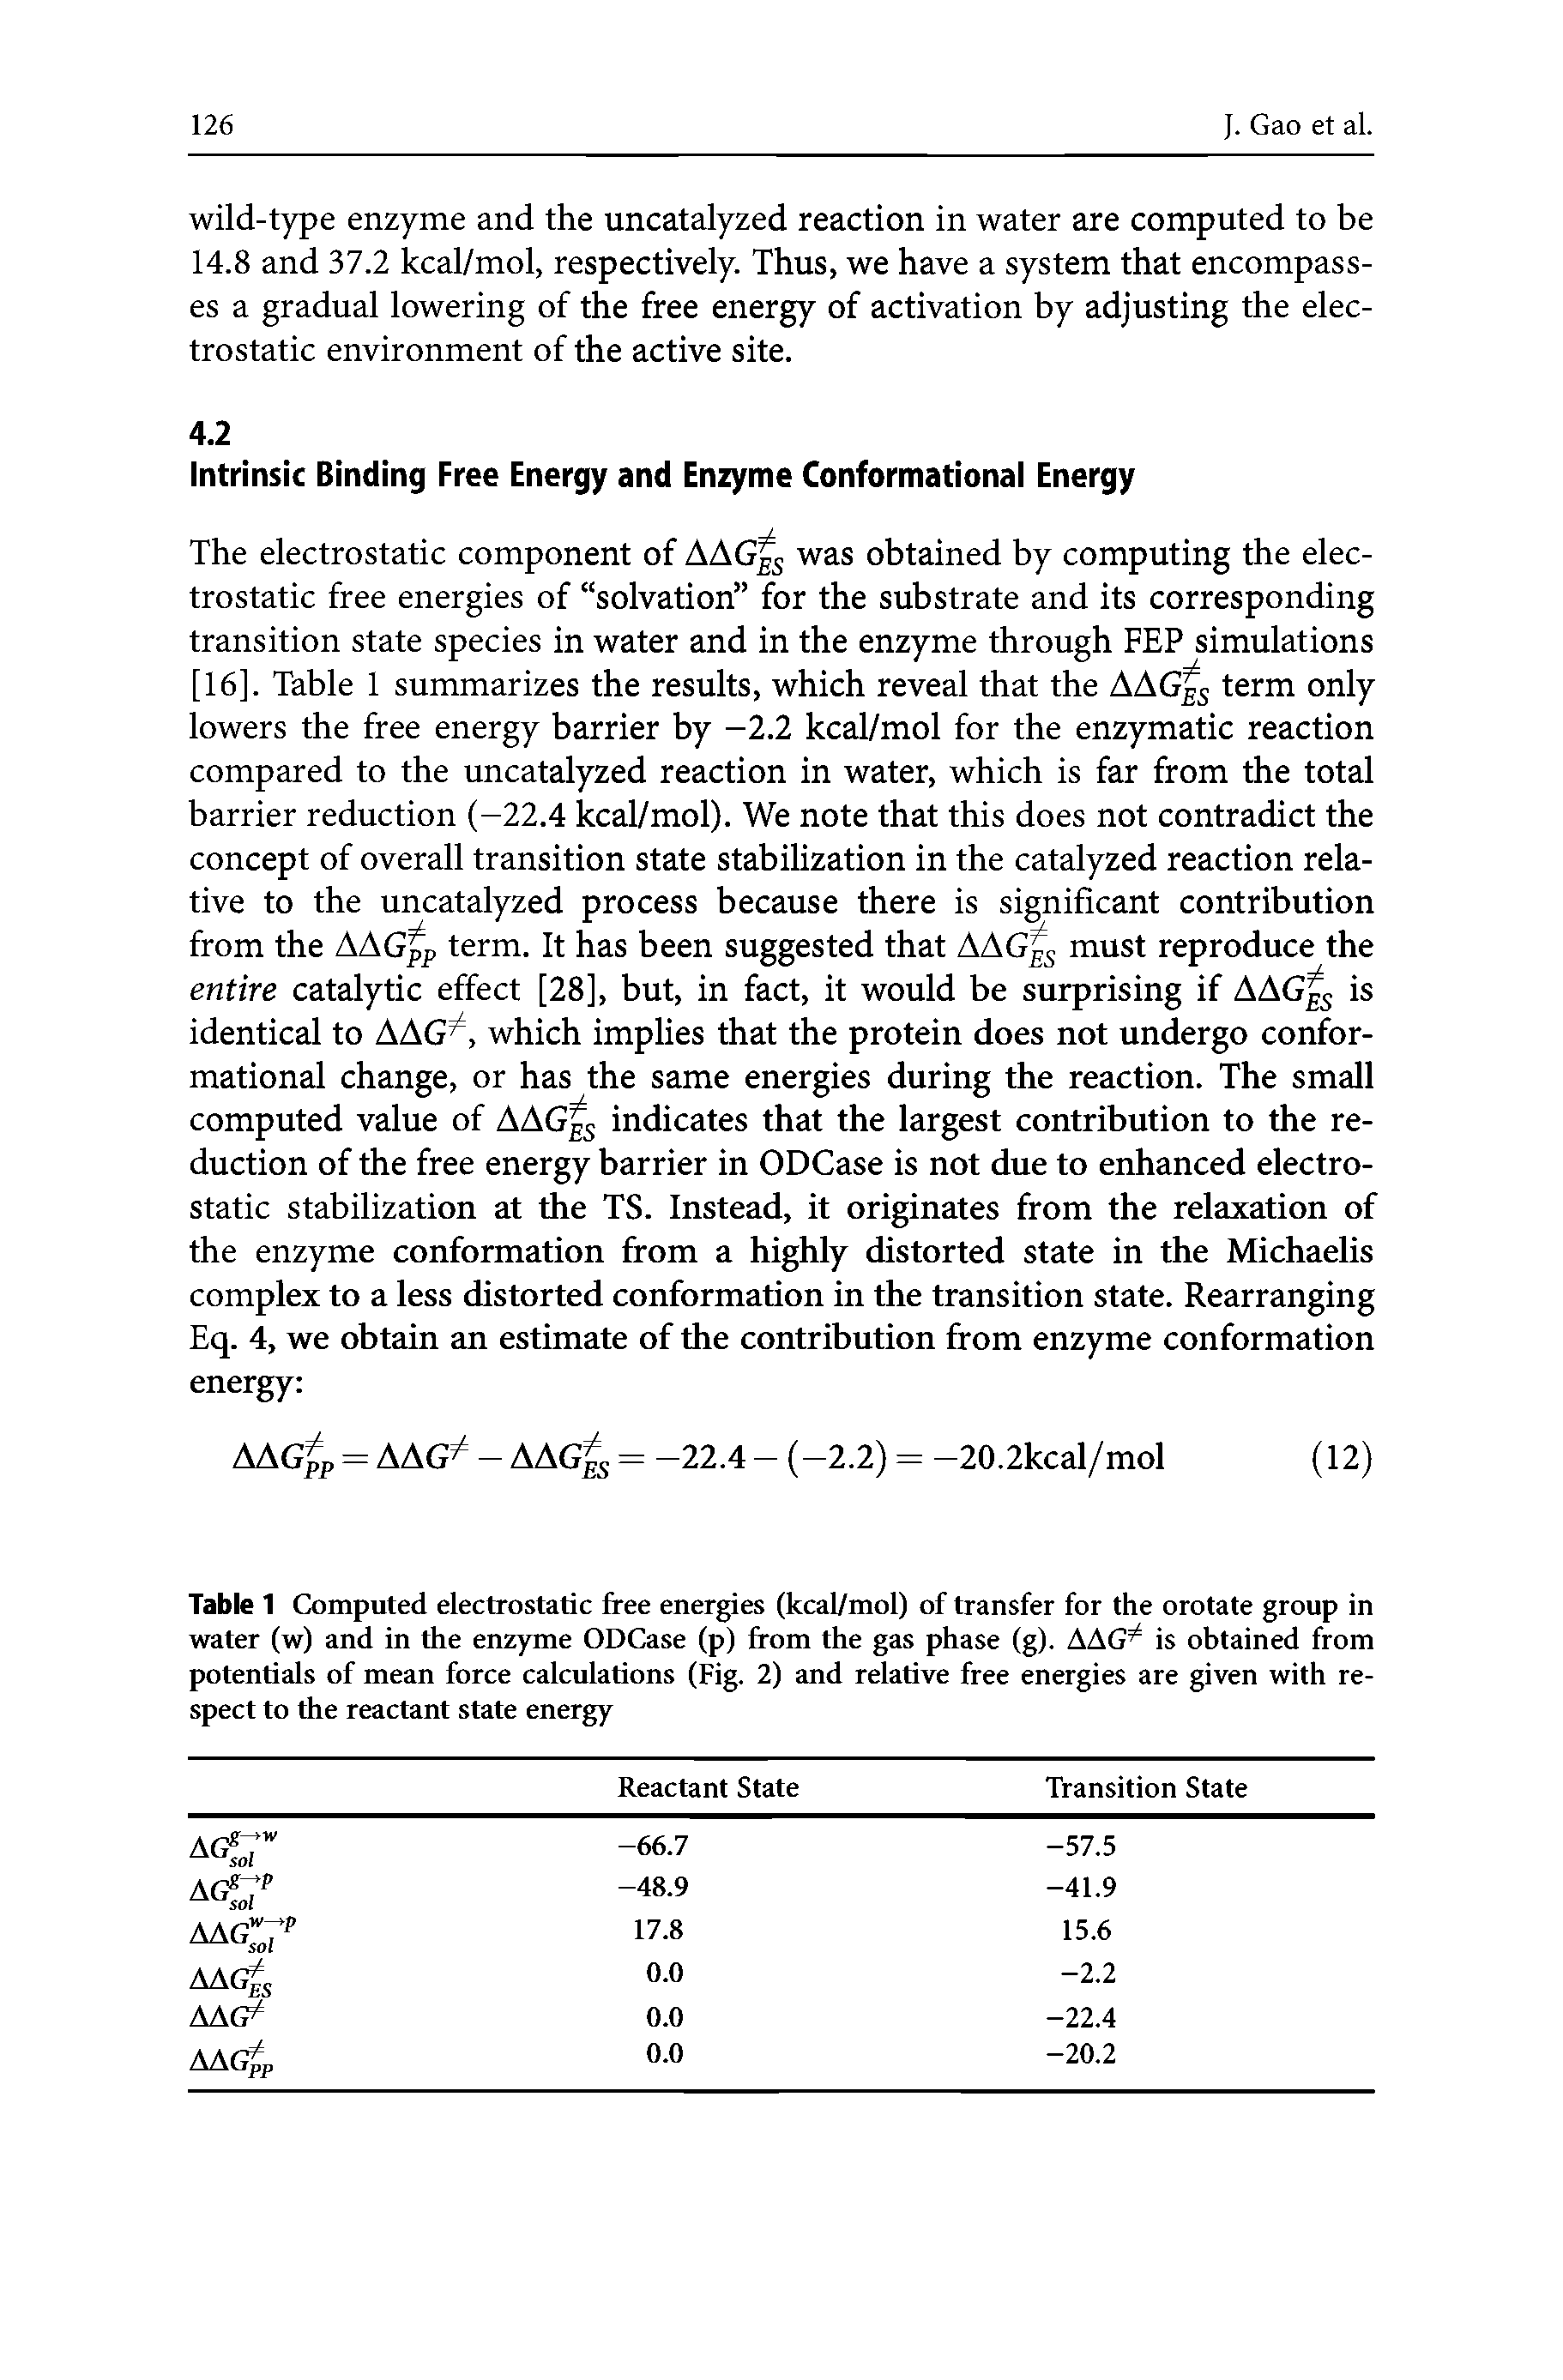 Table 1 Computed electrostatic free energies (kcal/mol) of transfer for the orotate group in water (w) and in the enzyme ODCase (p) from the gas phase (g). AAG is obtained from potentials of mean force calculations (Fig. 2) and relative free energies are given with respect to the reactant state energy...